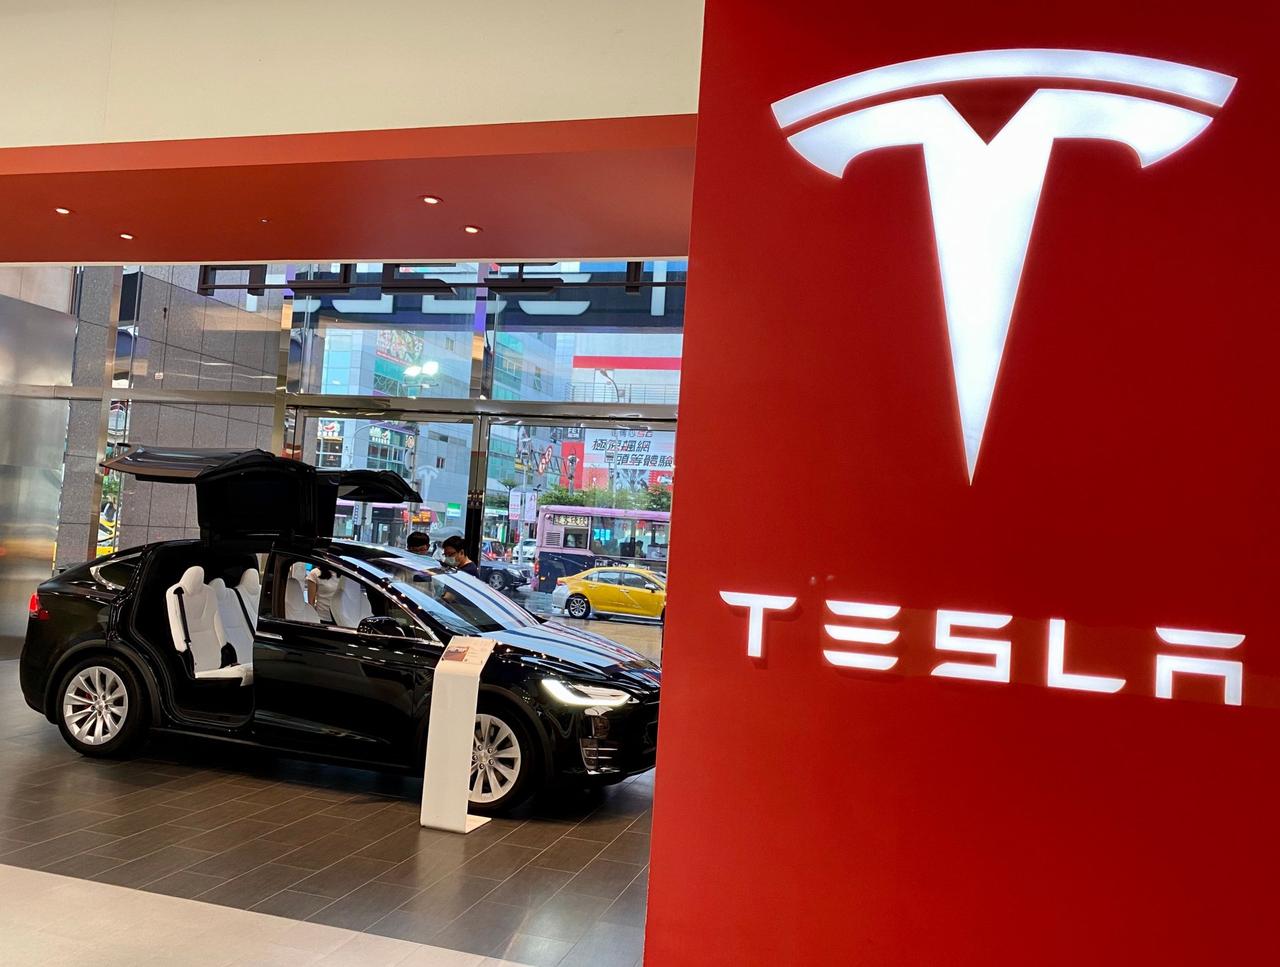 Mandatory Credit: Photo by RITCHIE B TONGO/EPA-EFE/Shutterstock (10724187c)People check the interior of Tesla Model X car on display inside a Tesla showroom in Taipei, Taiwan, 27 July 2020.